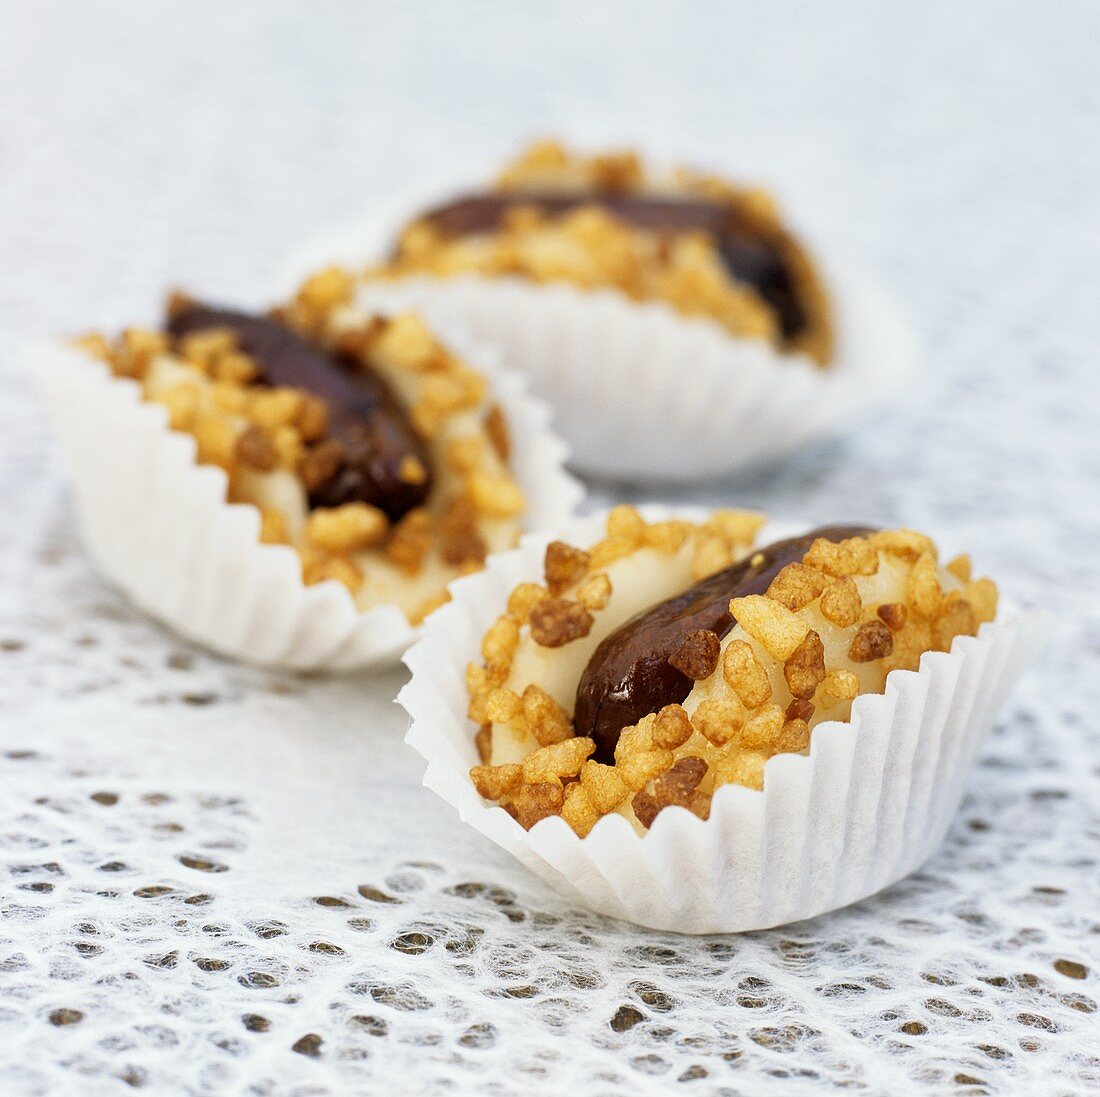 Marzipan and date sweets